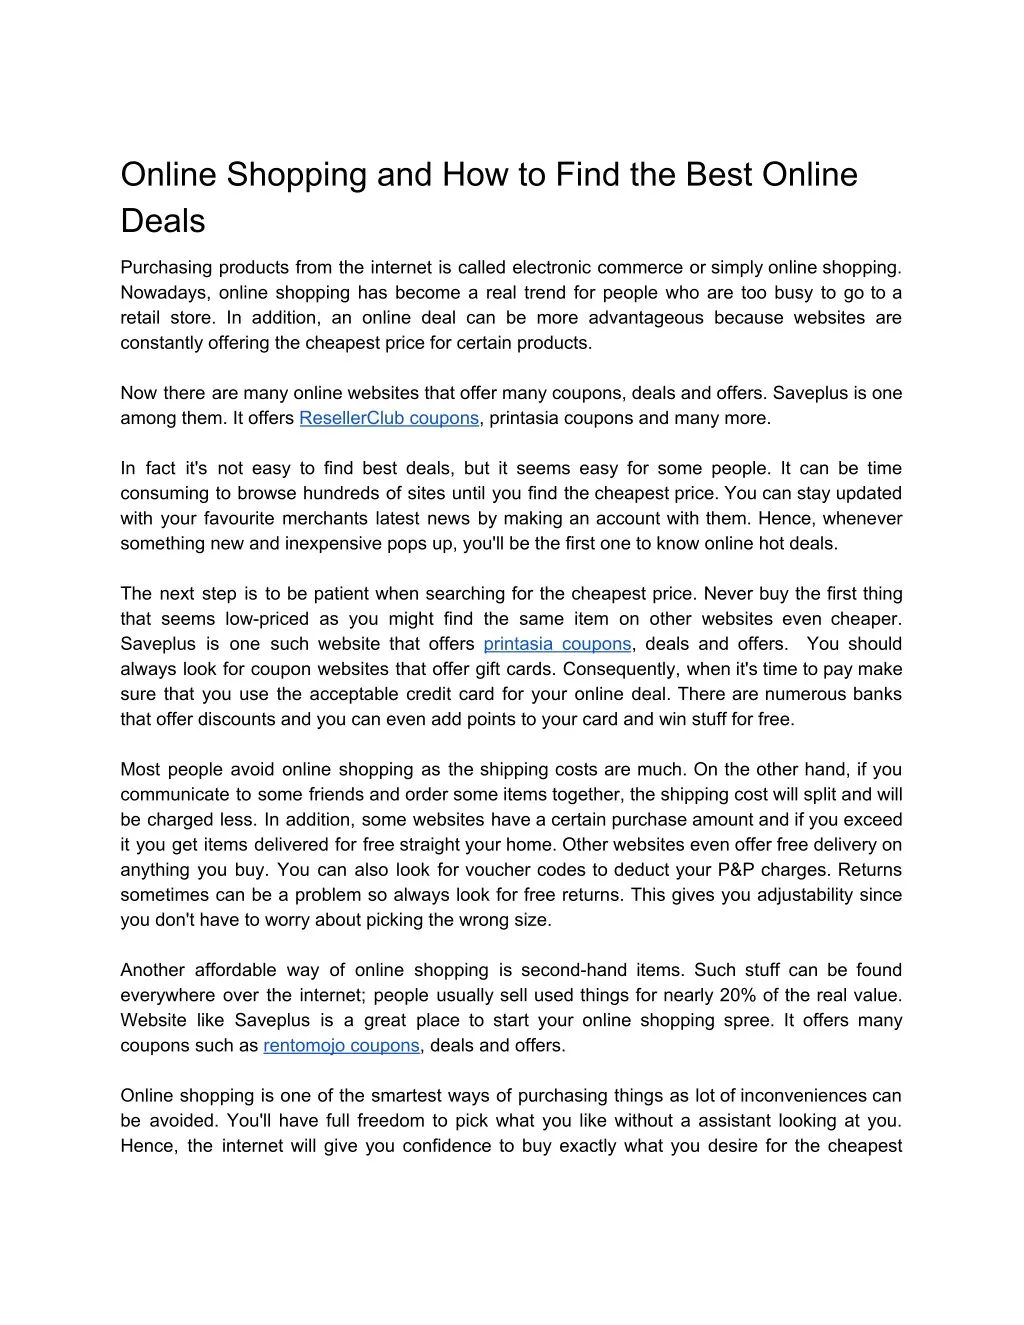 online shopping and how to find the best online